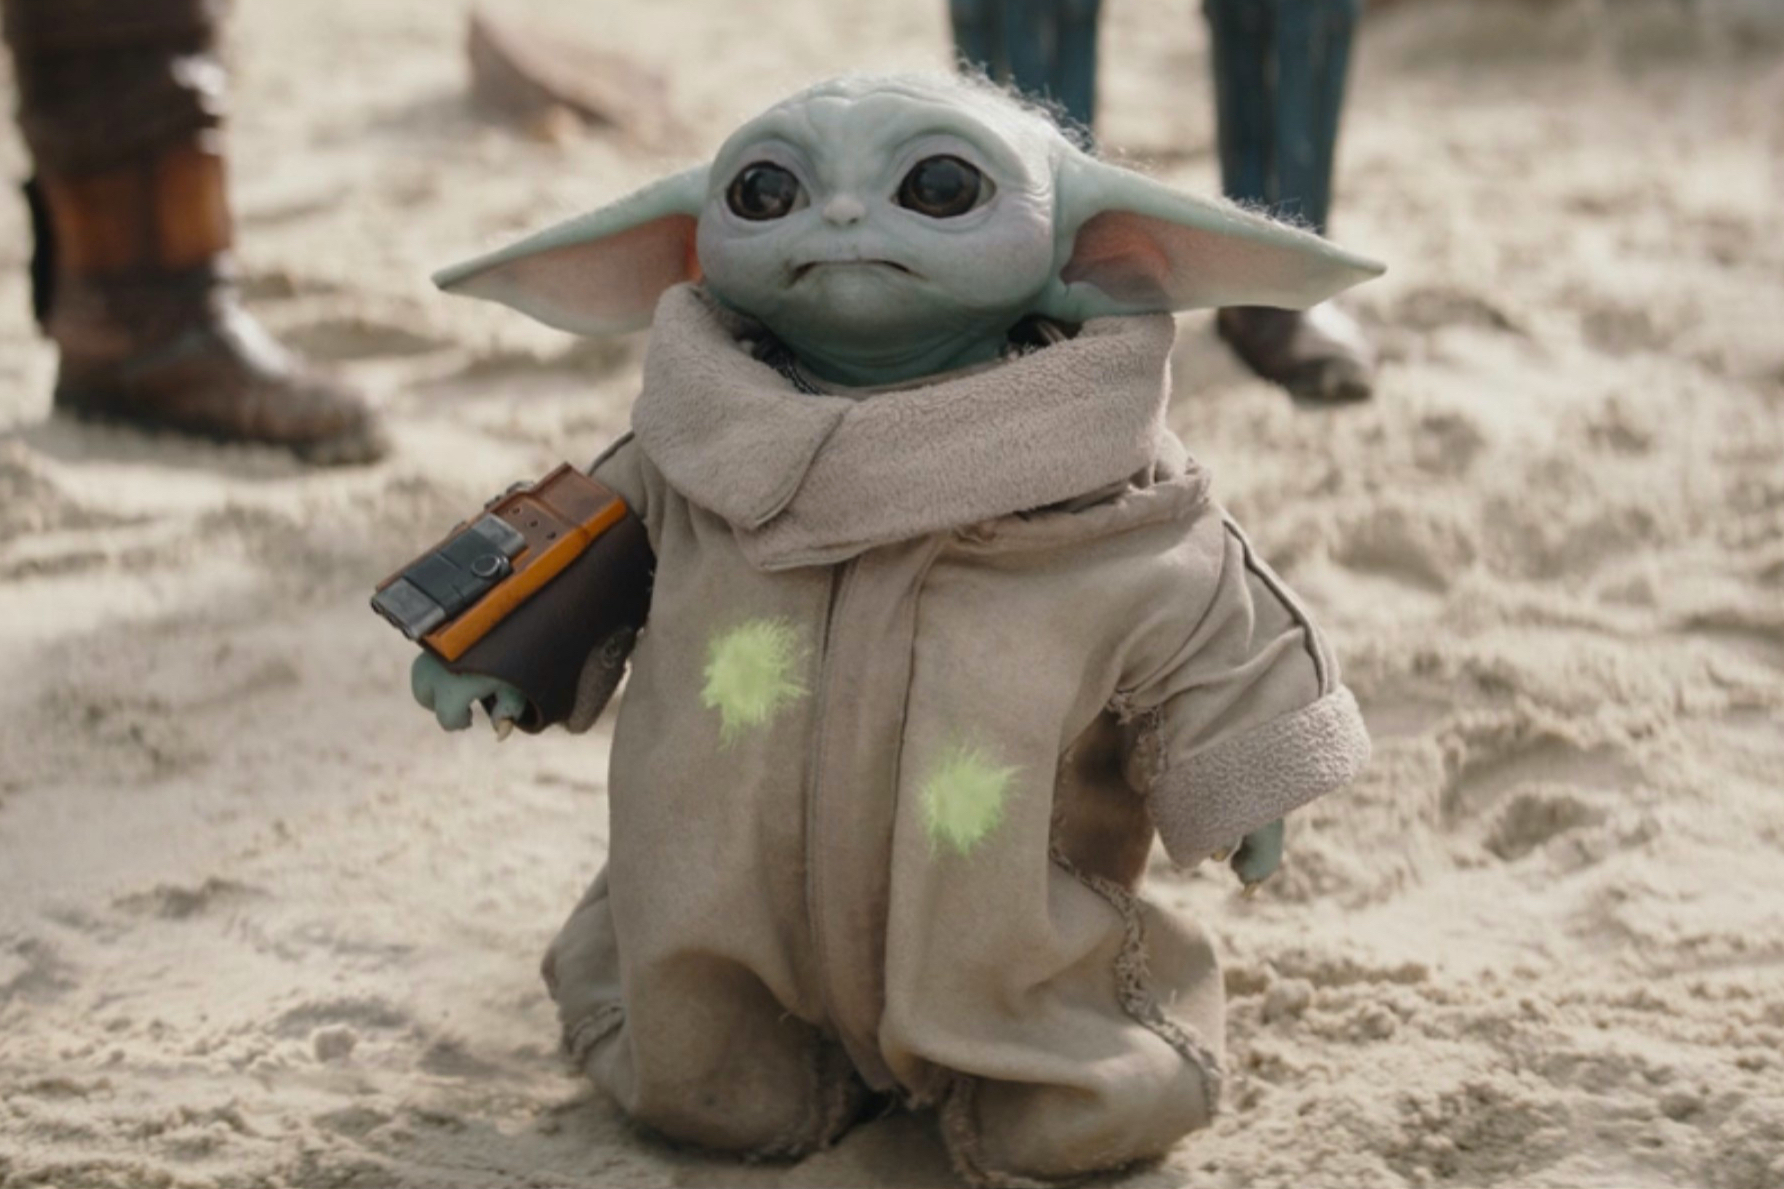 Grogu standing in the sand from an episode of The Mandalorian.